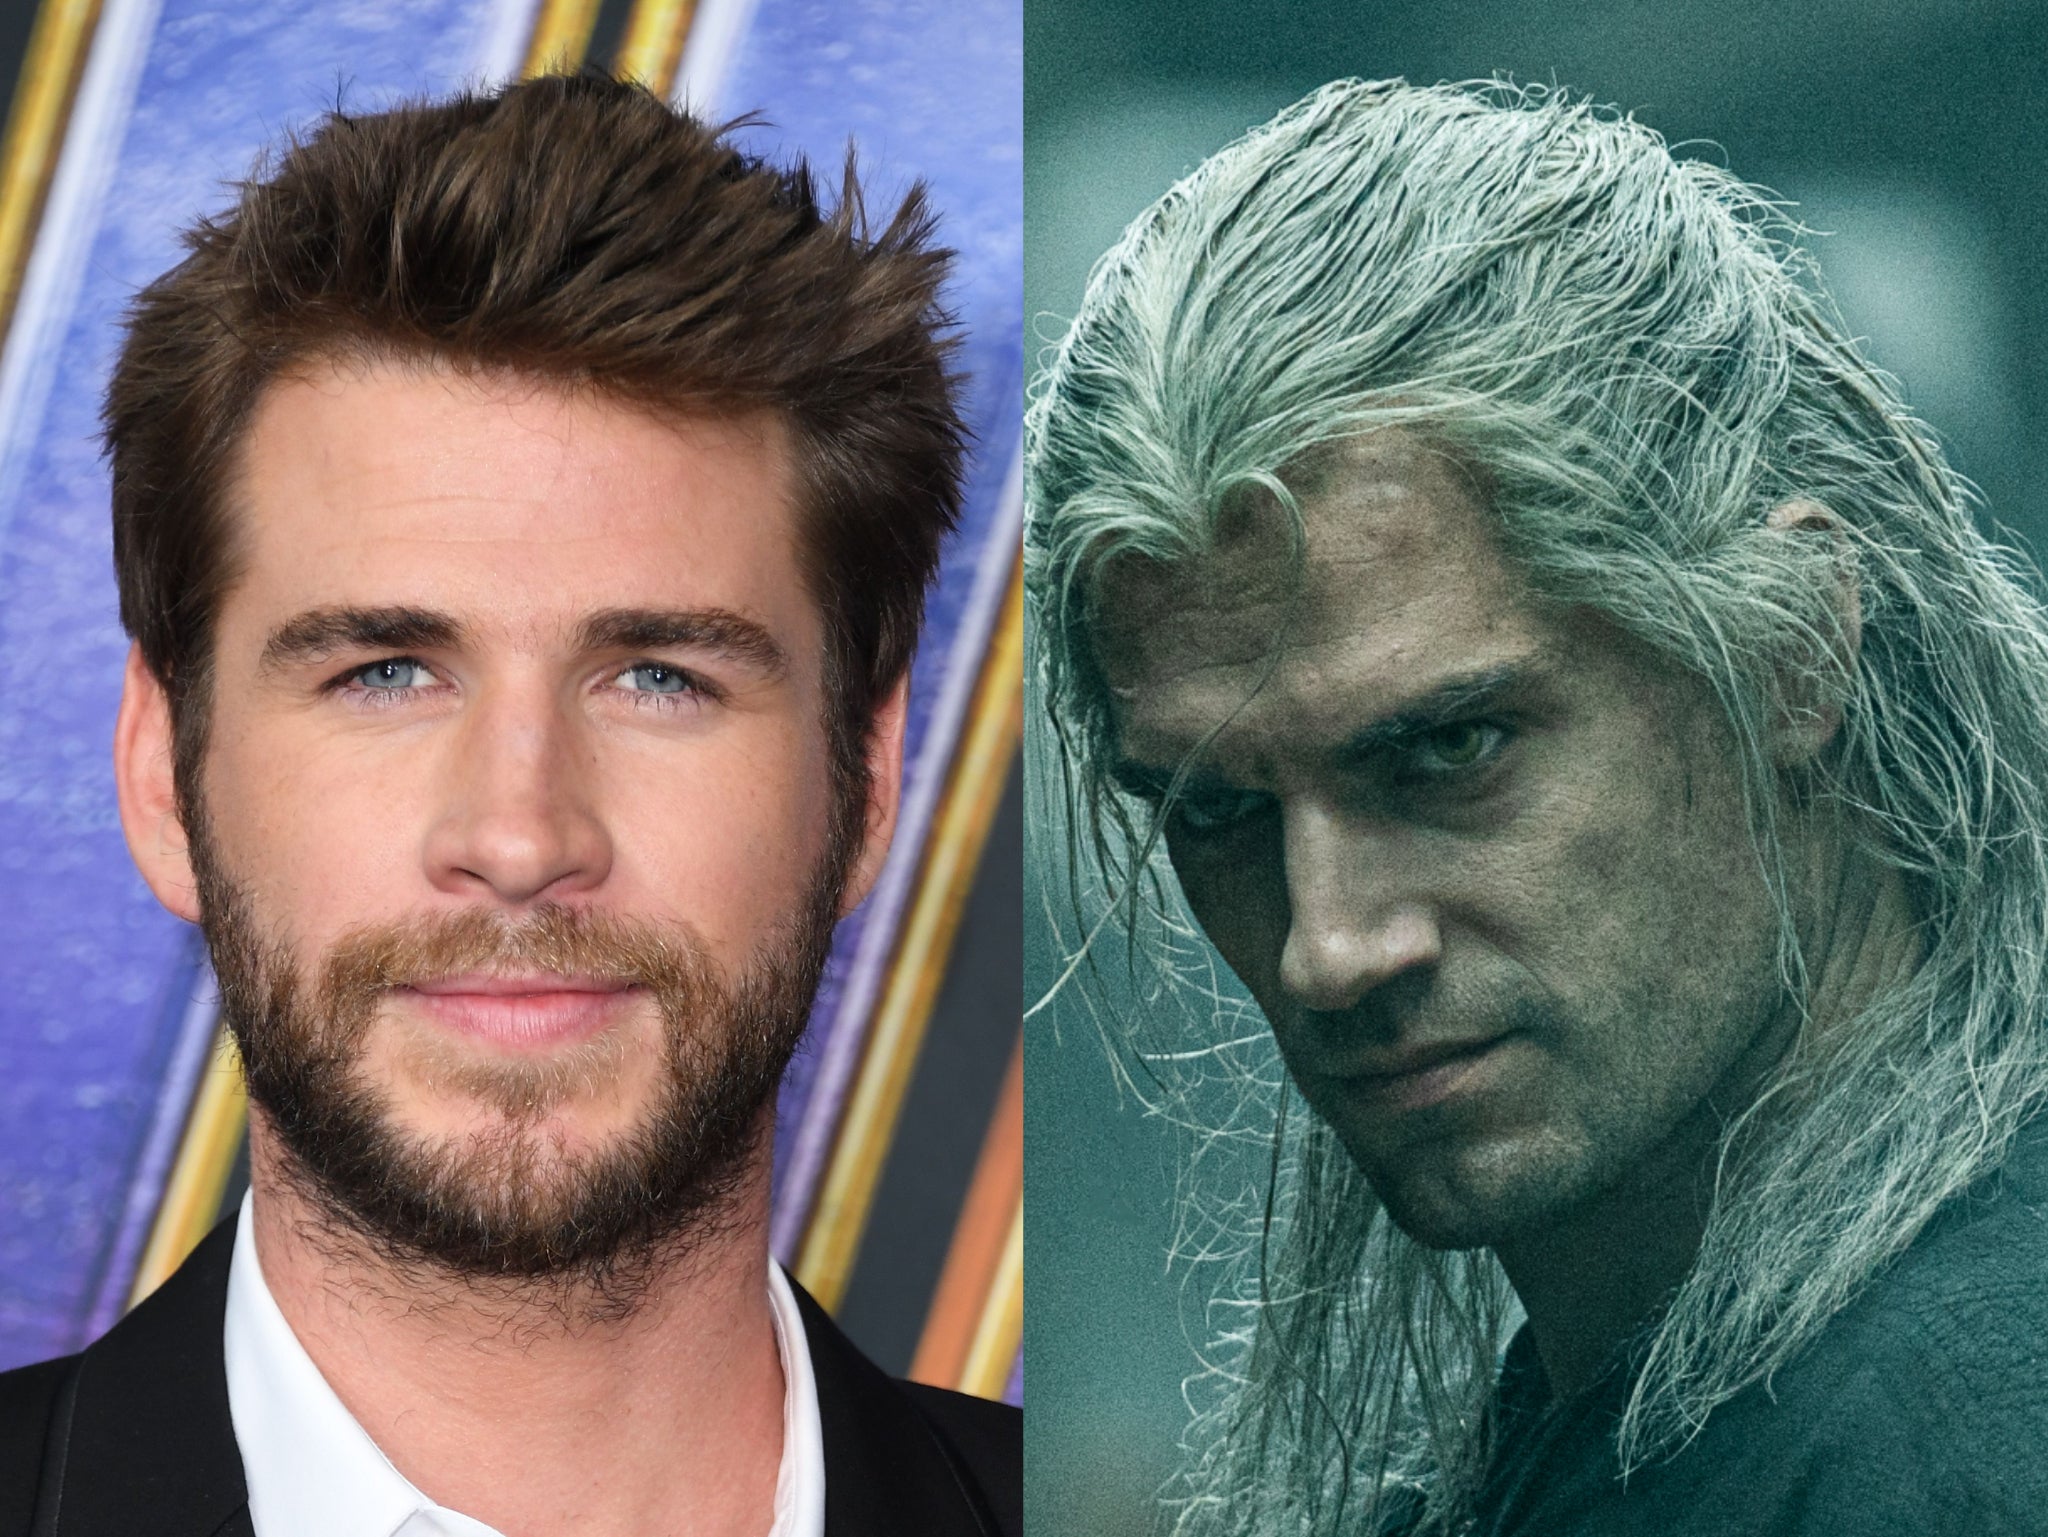 Liam Hemsworth and Henry Cavill in ‘The Witcher’